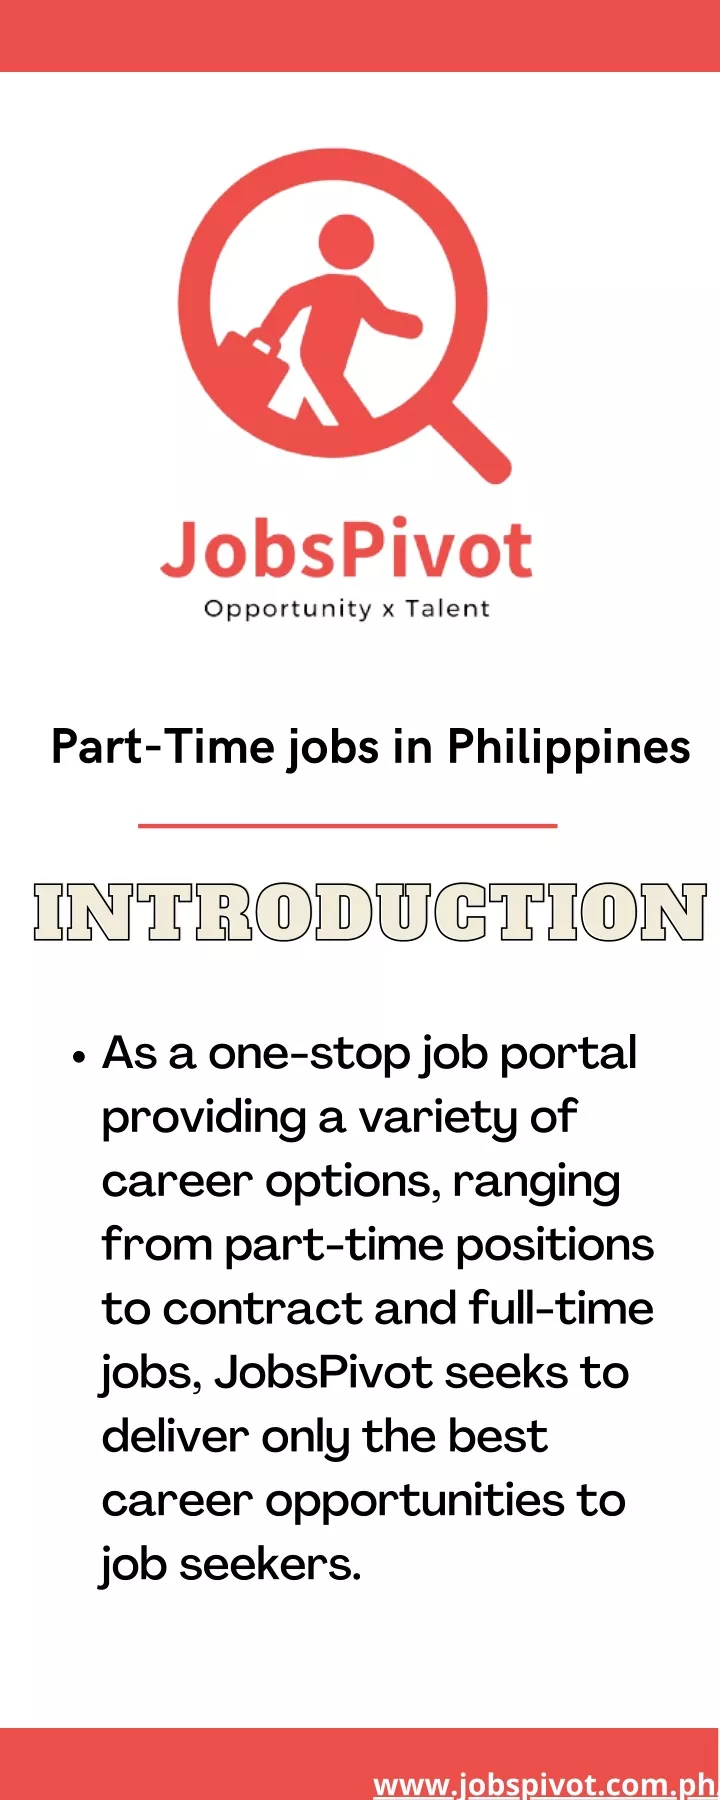 part time jobs in philippines